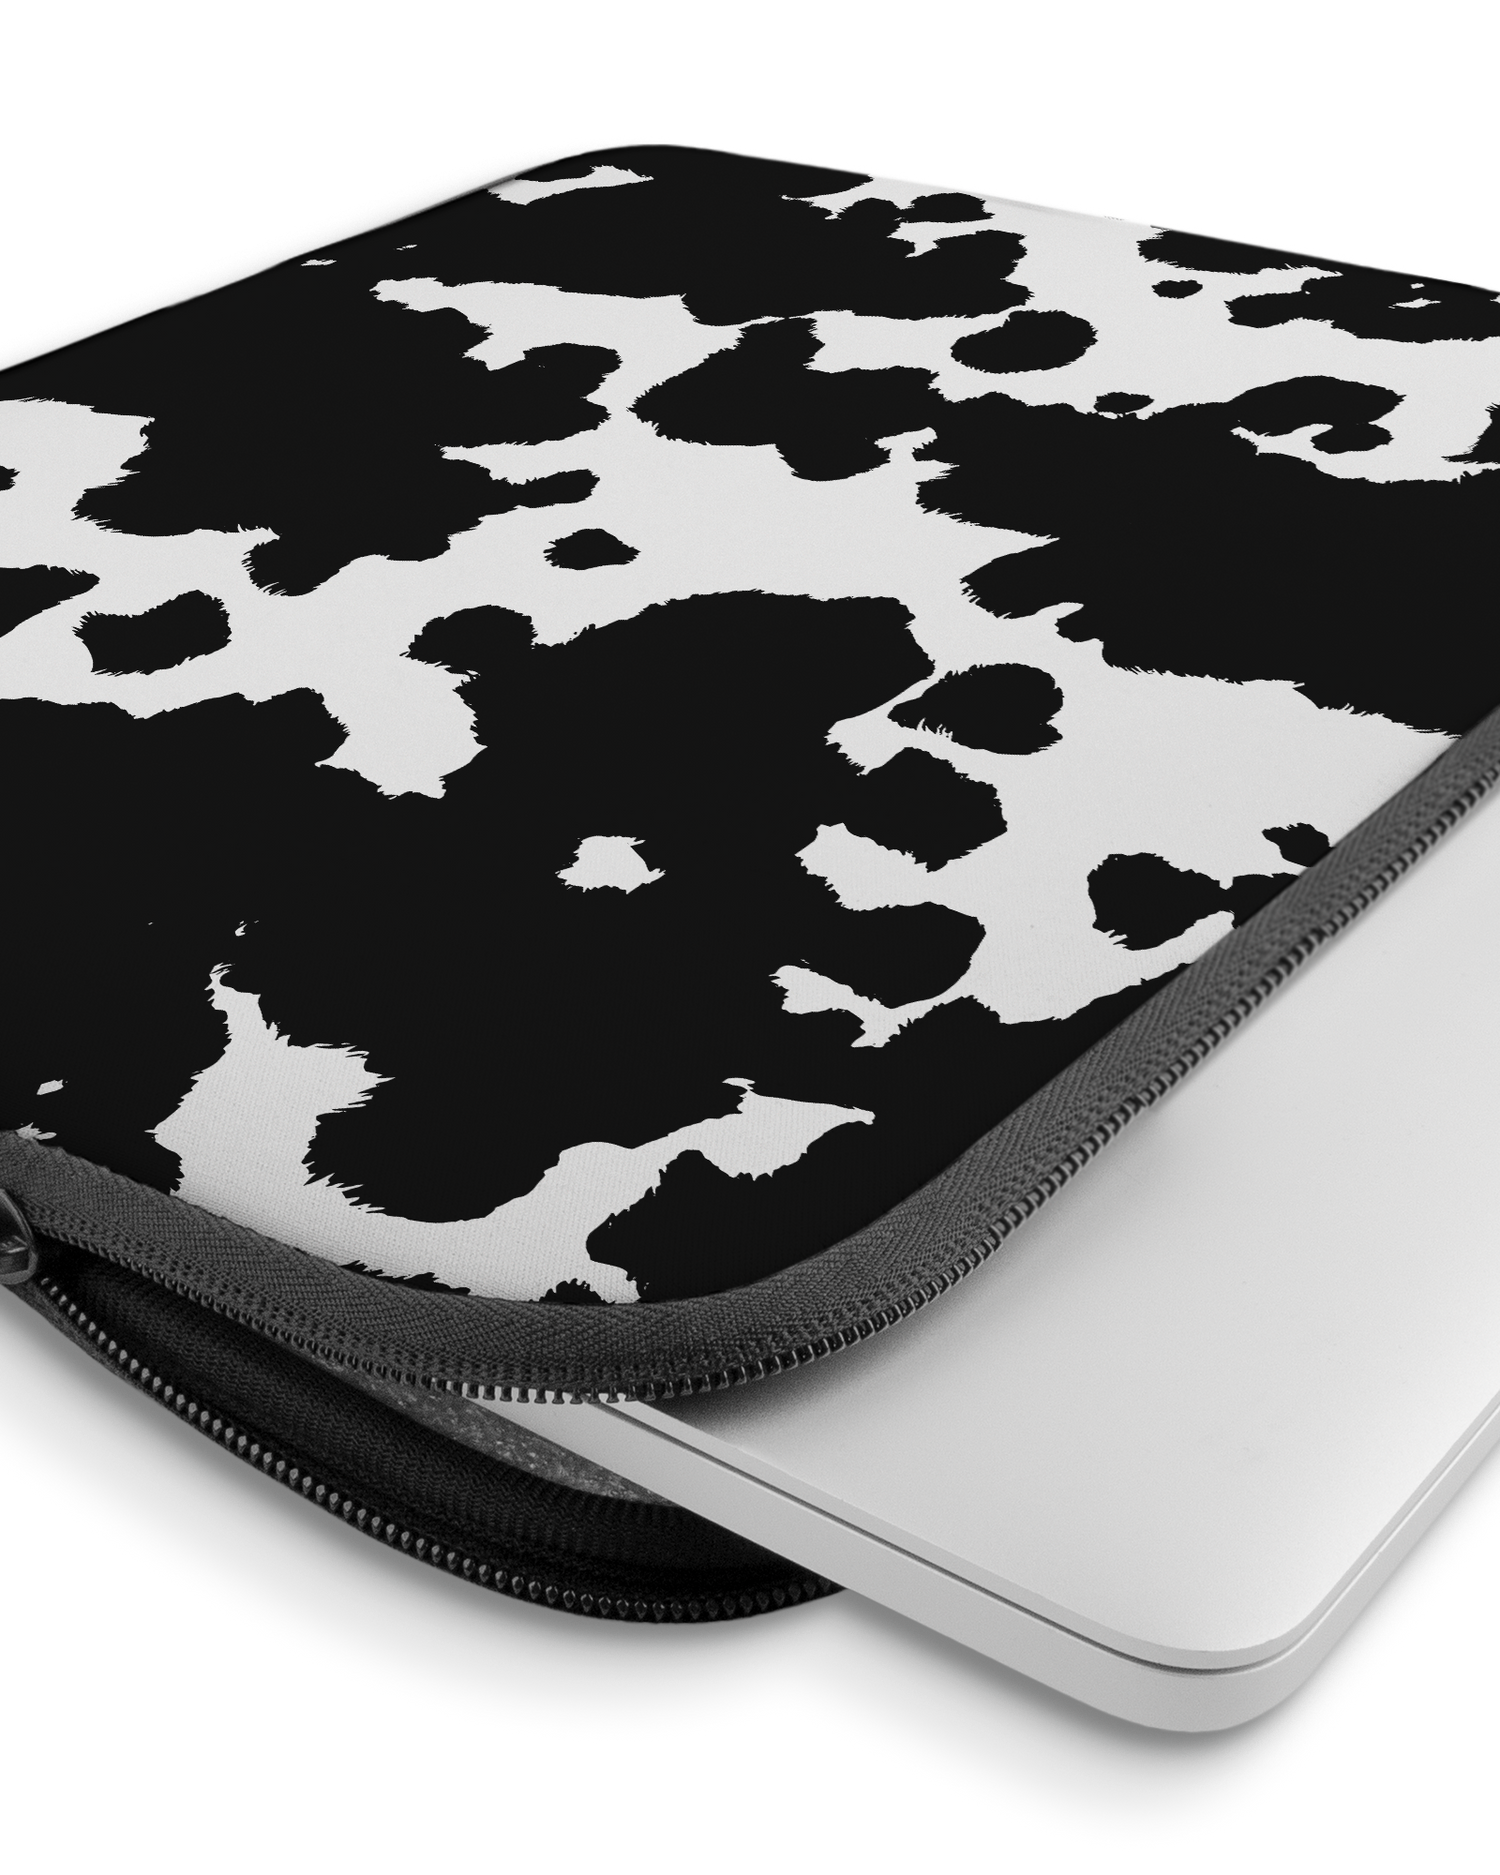 Cow Print Laptop Case 15 inch with device inside